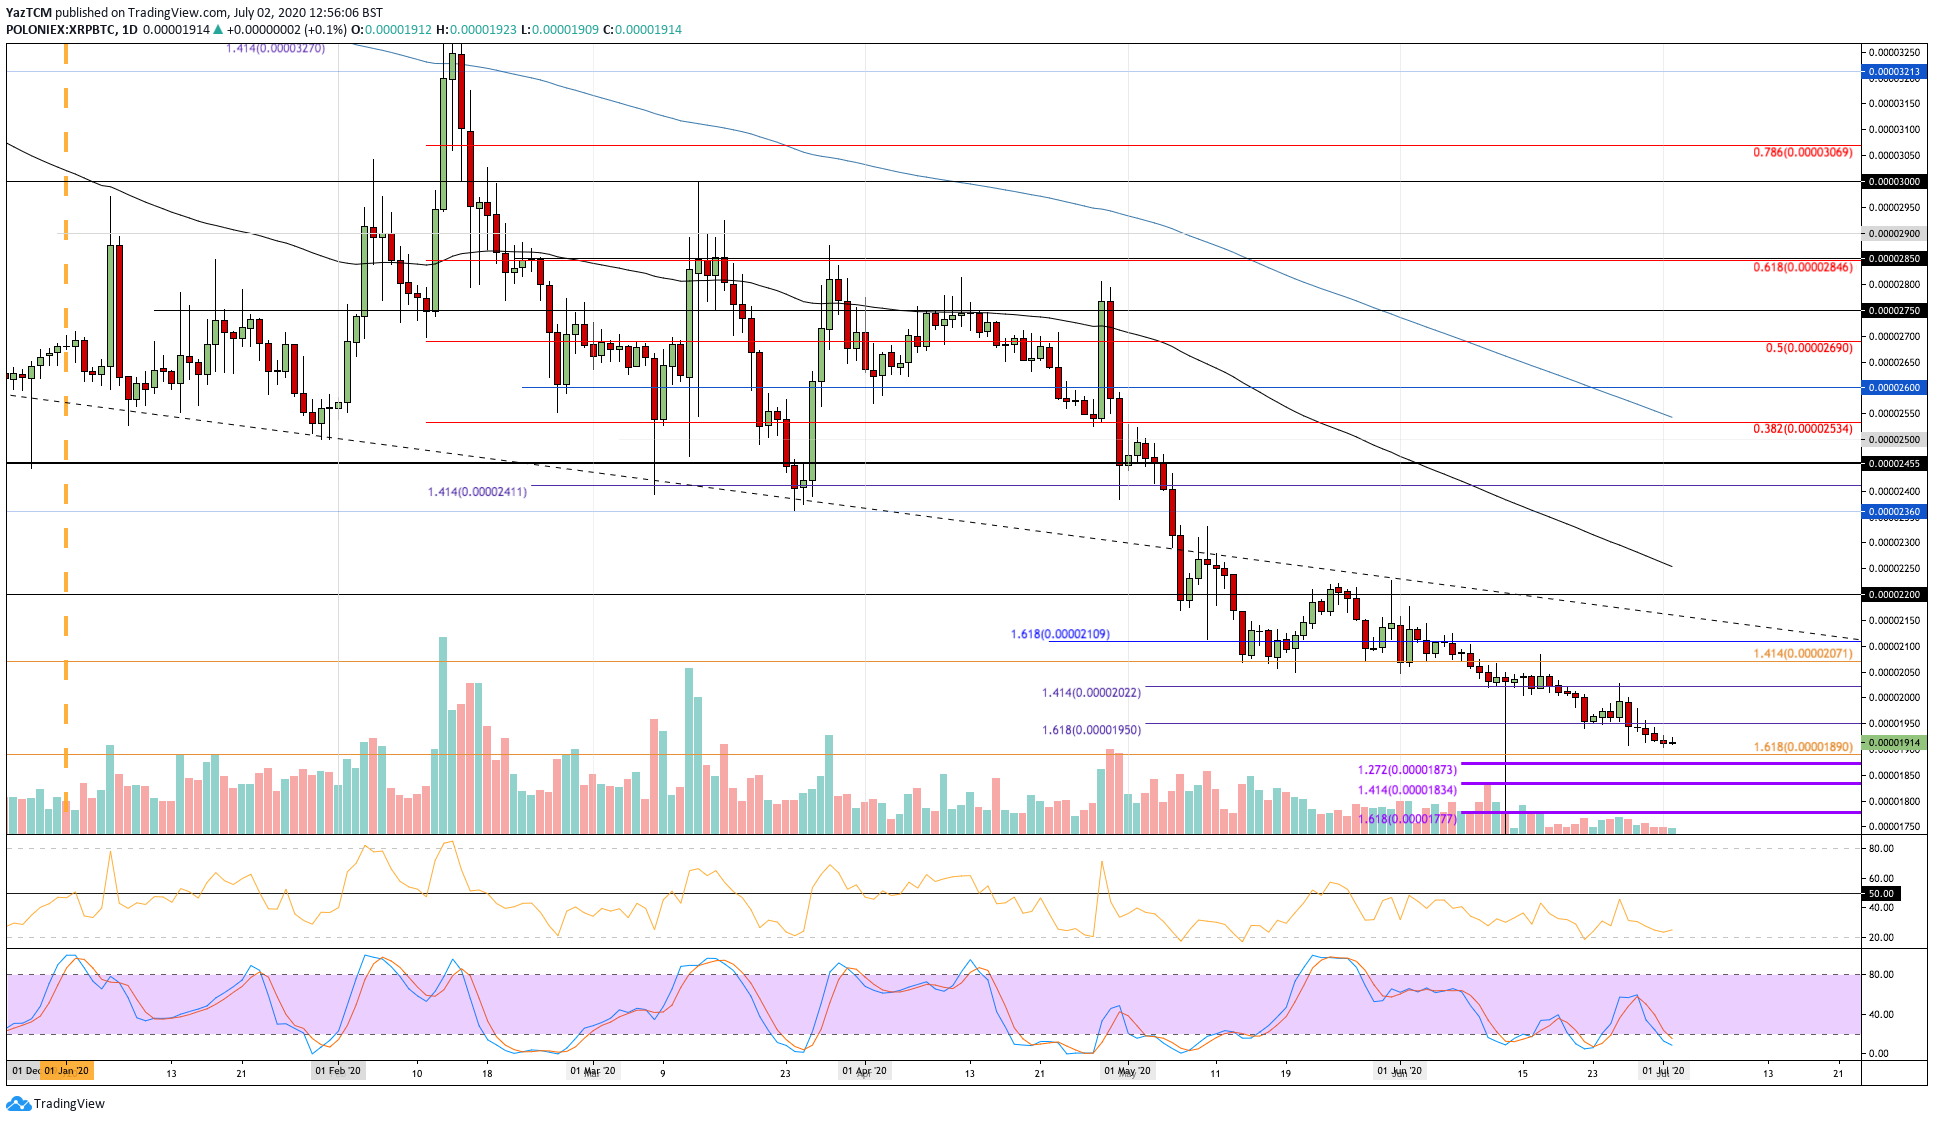 Ripple Price Analysis: Things Looking Grim for XRP as Bears Attempt To Push Below 1900 SAT